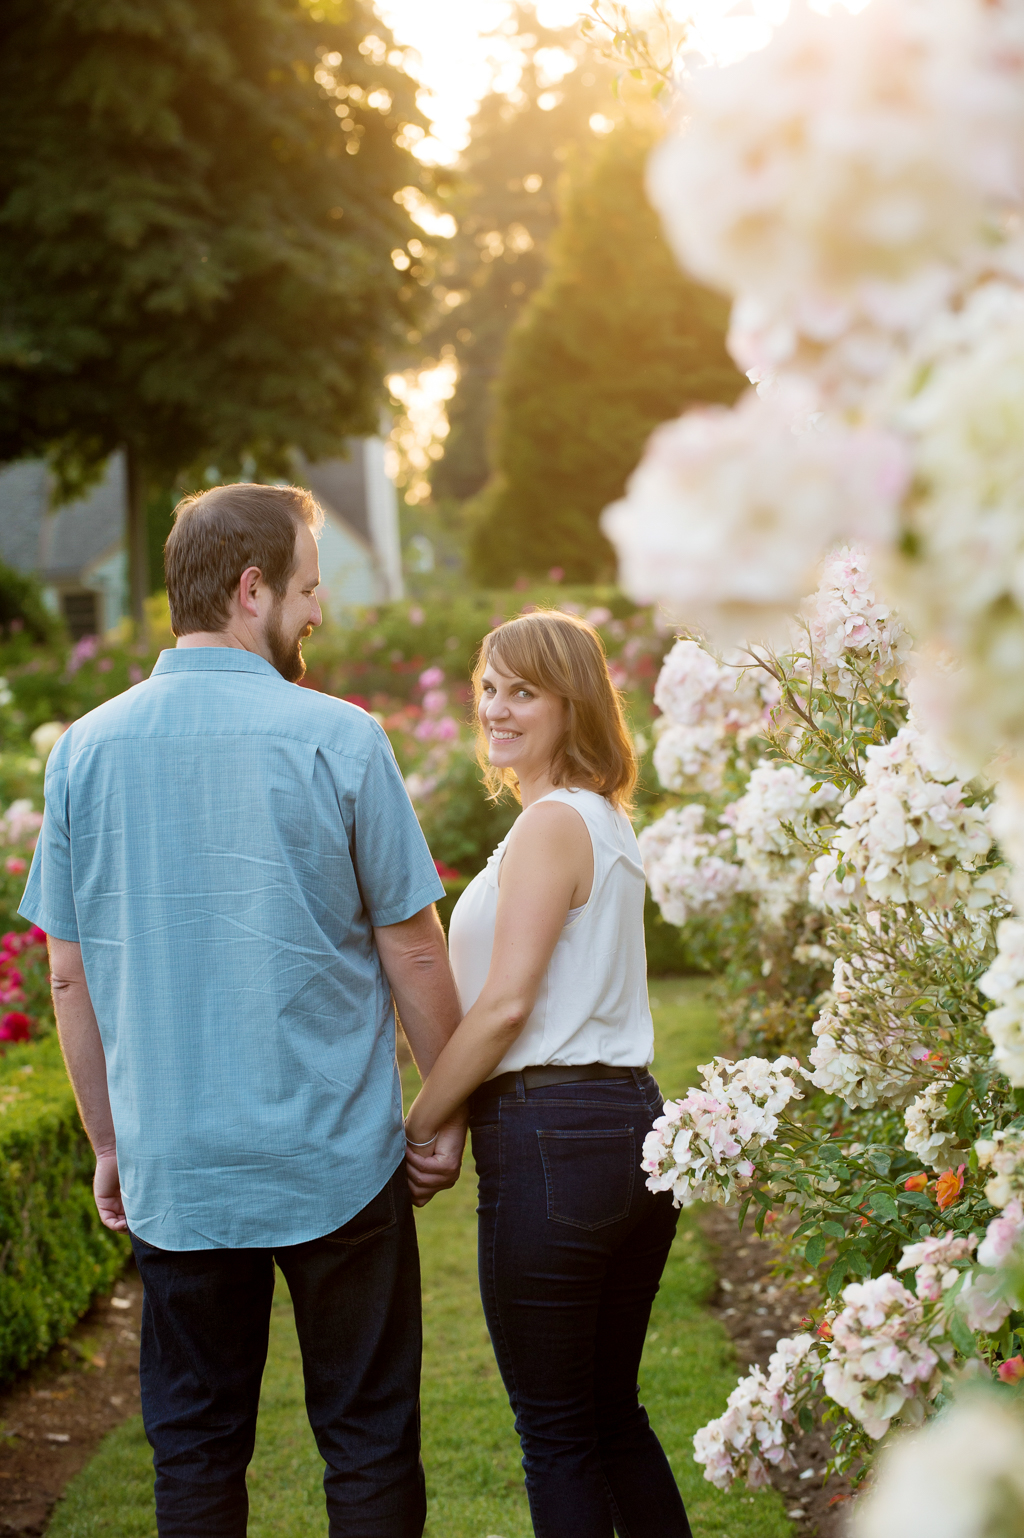 a woman looks over her shoulder at the camera while her boyfriend holds her hand and looks at her surrounded by white roses